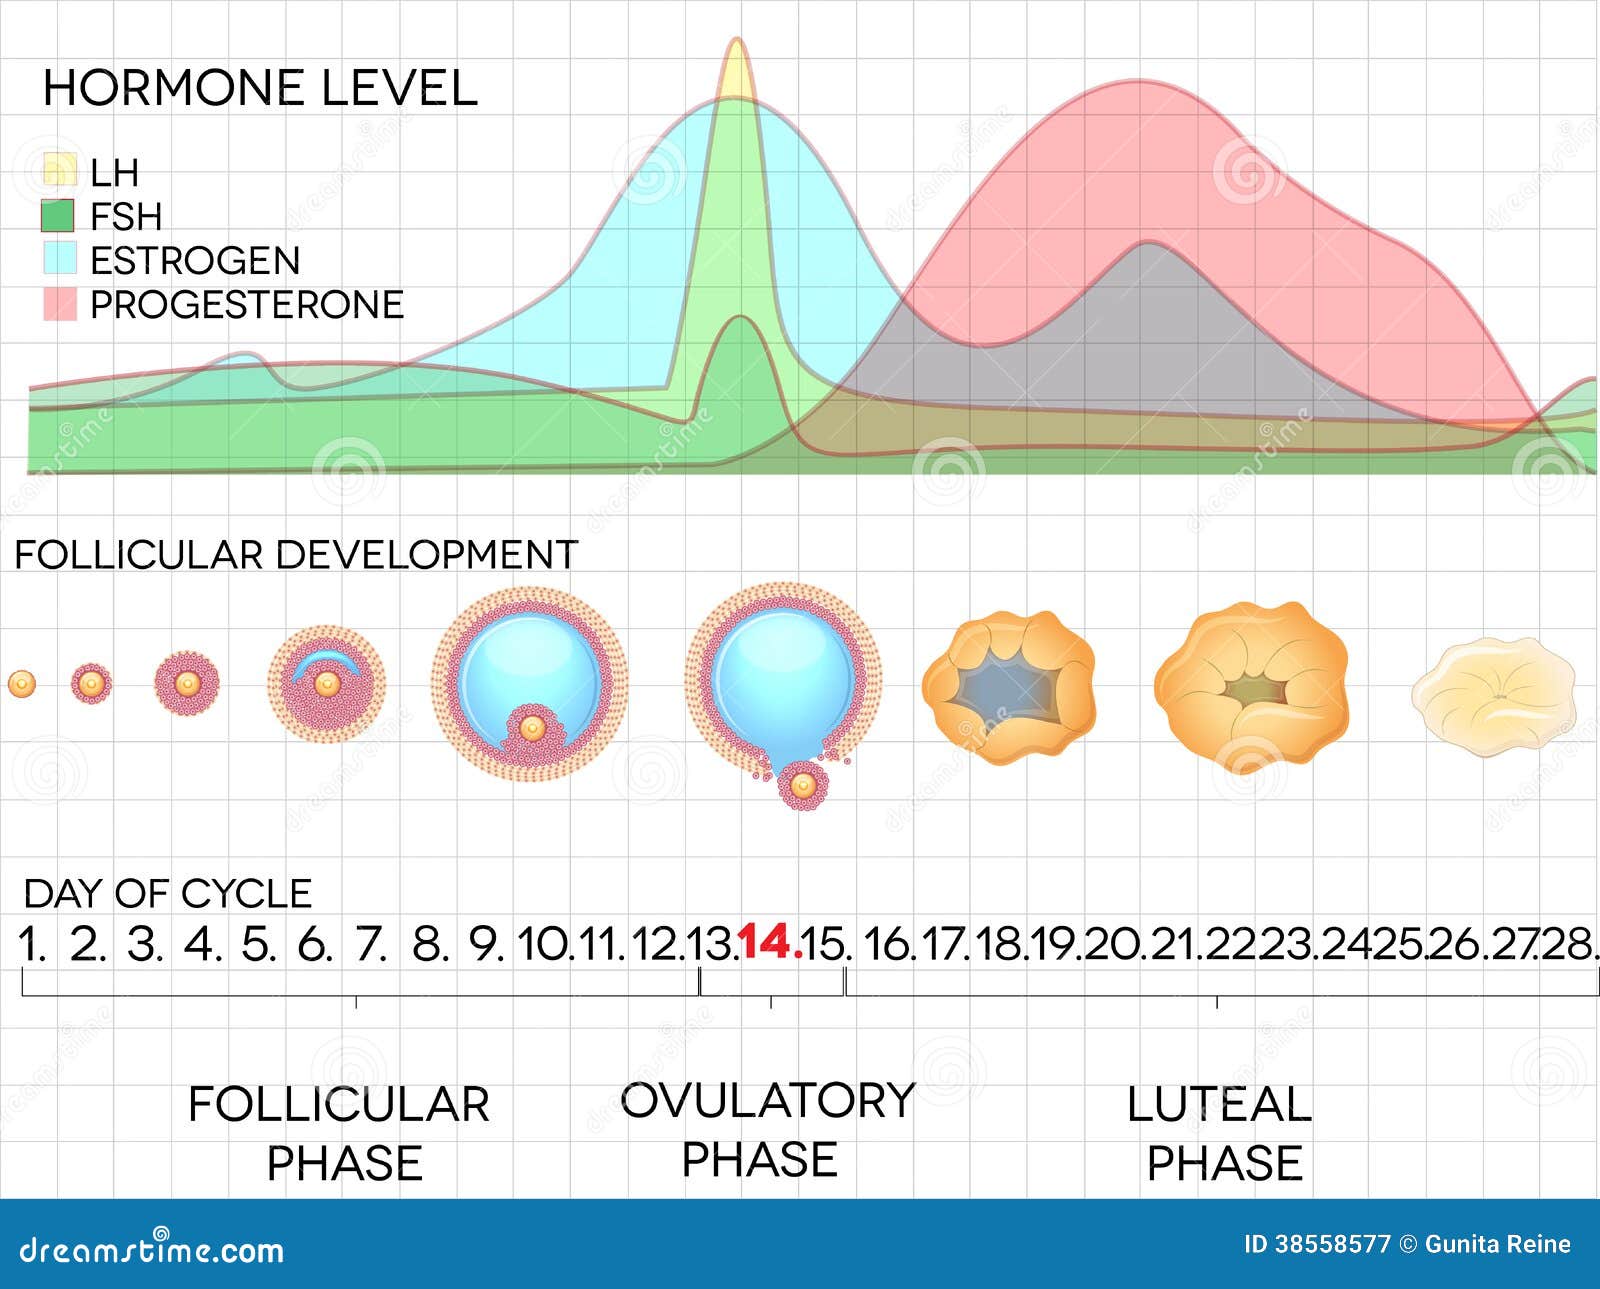 female menstrual cycle, ovulation process and hormone levels